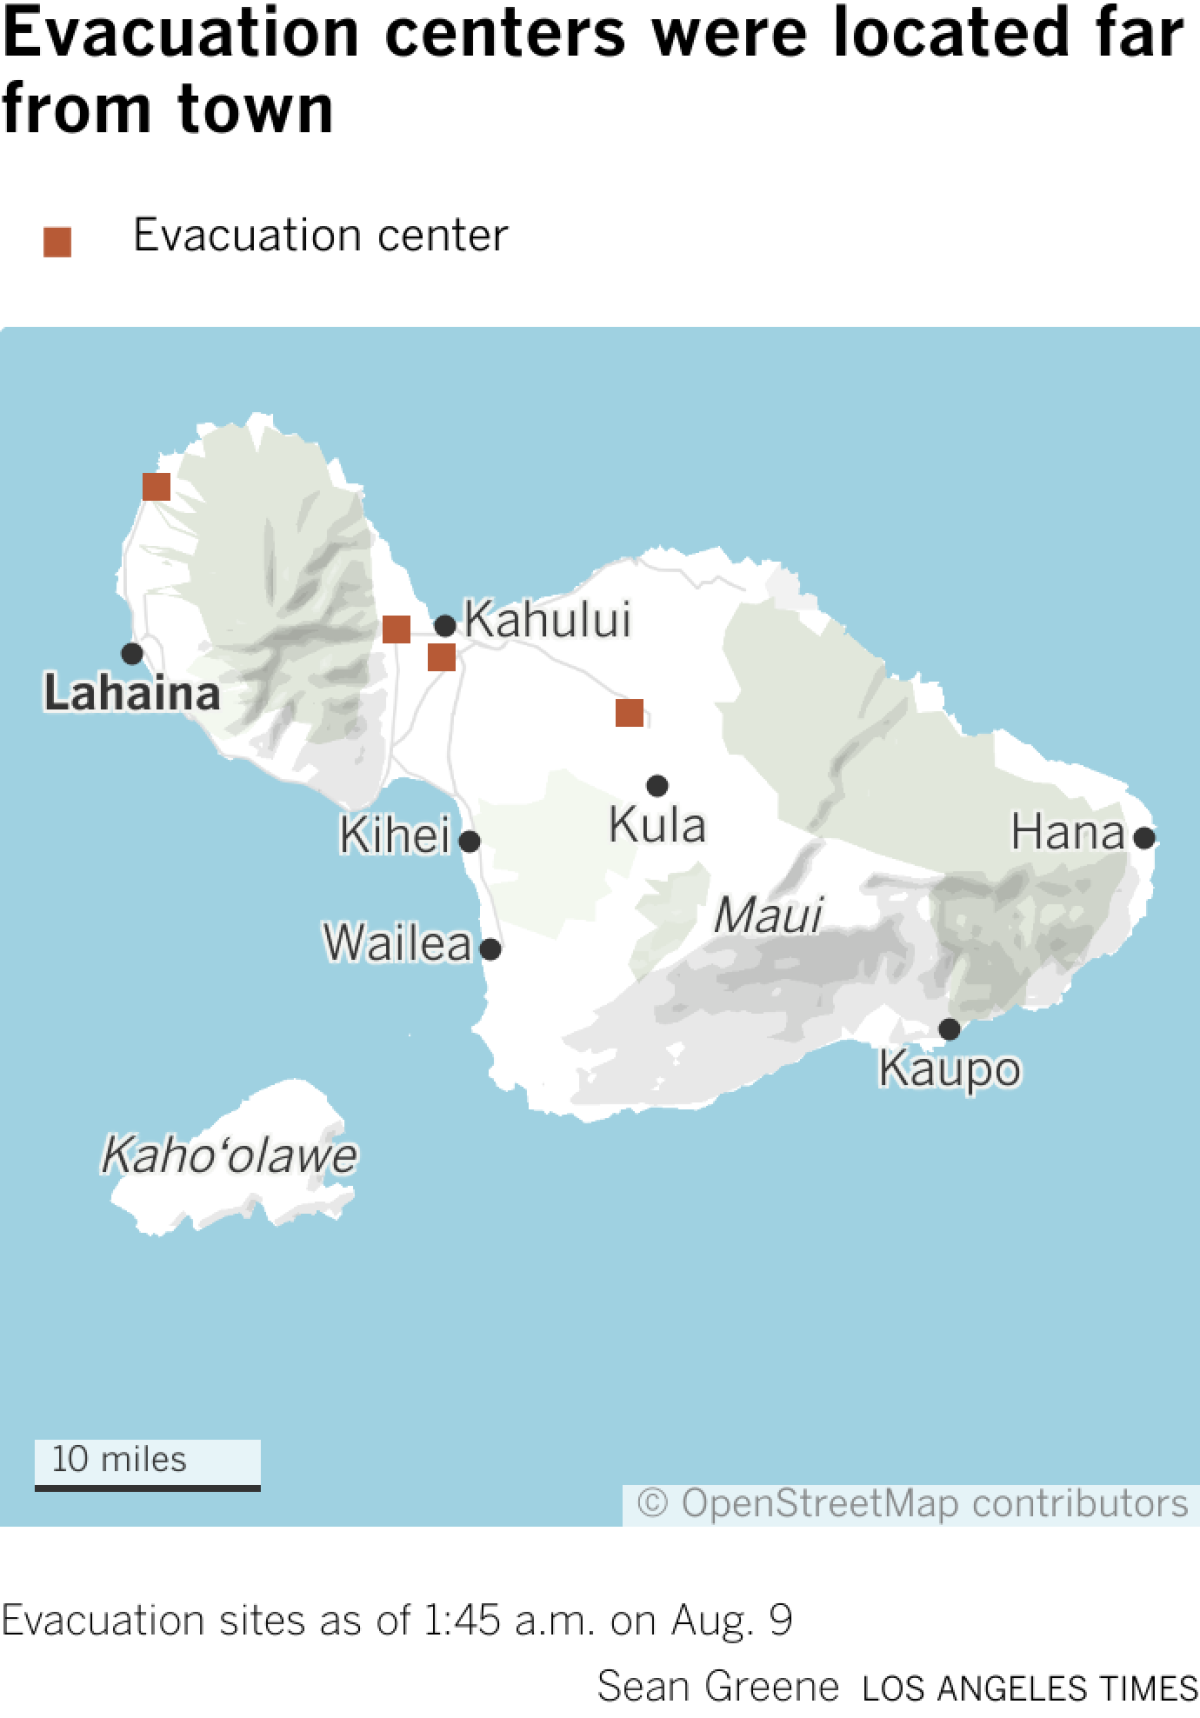 A map of Maui shows evacuation centers around the north and central areas of the island, far from the fire in Lahaina.